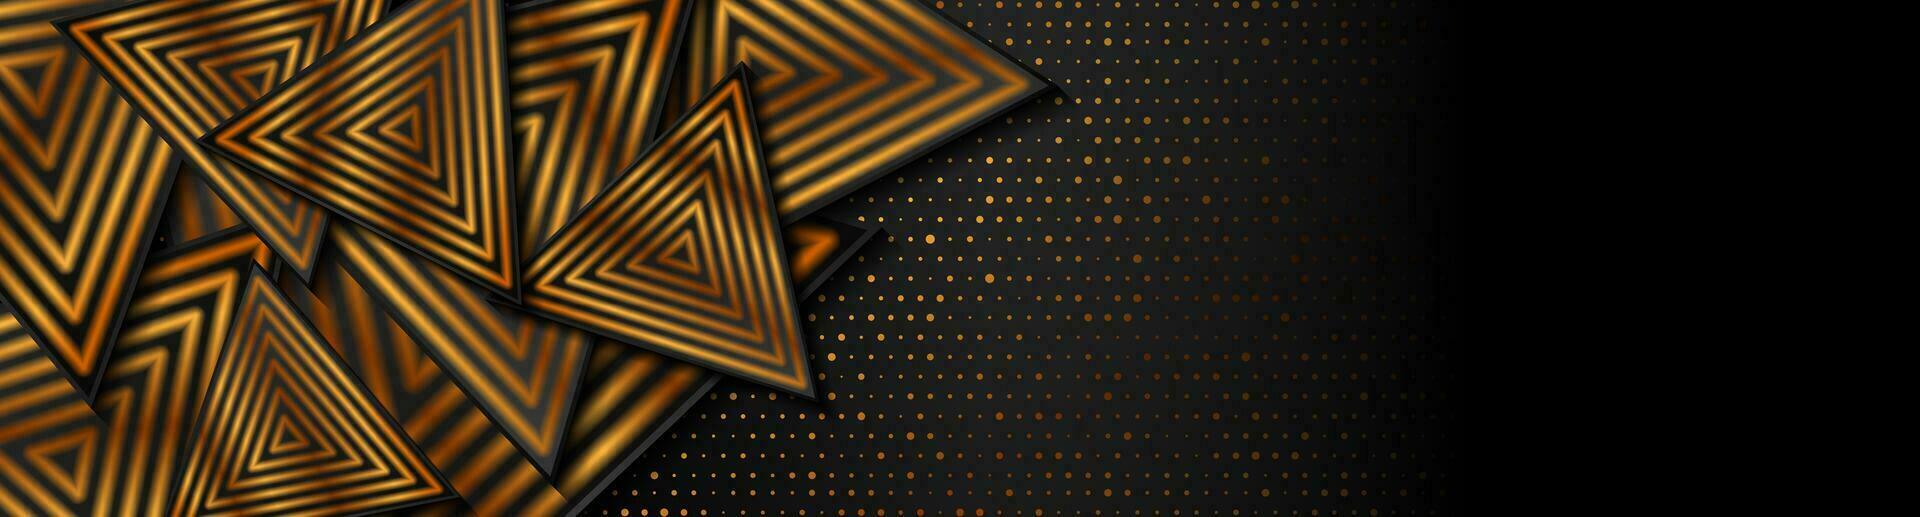 Abstract tech background with black and golden triangles vector